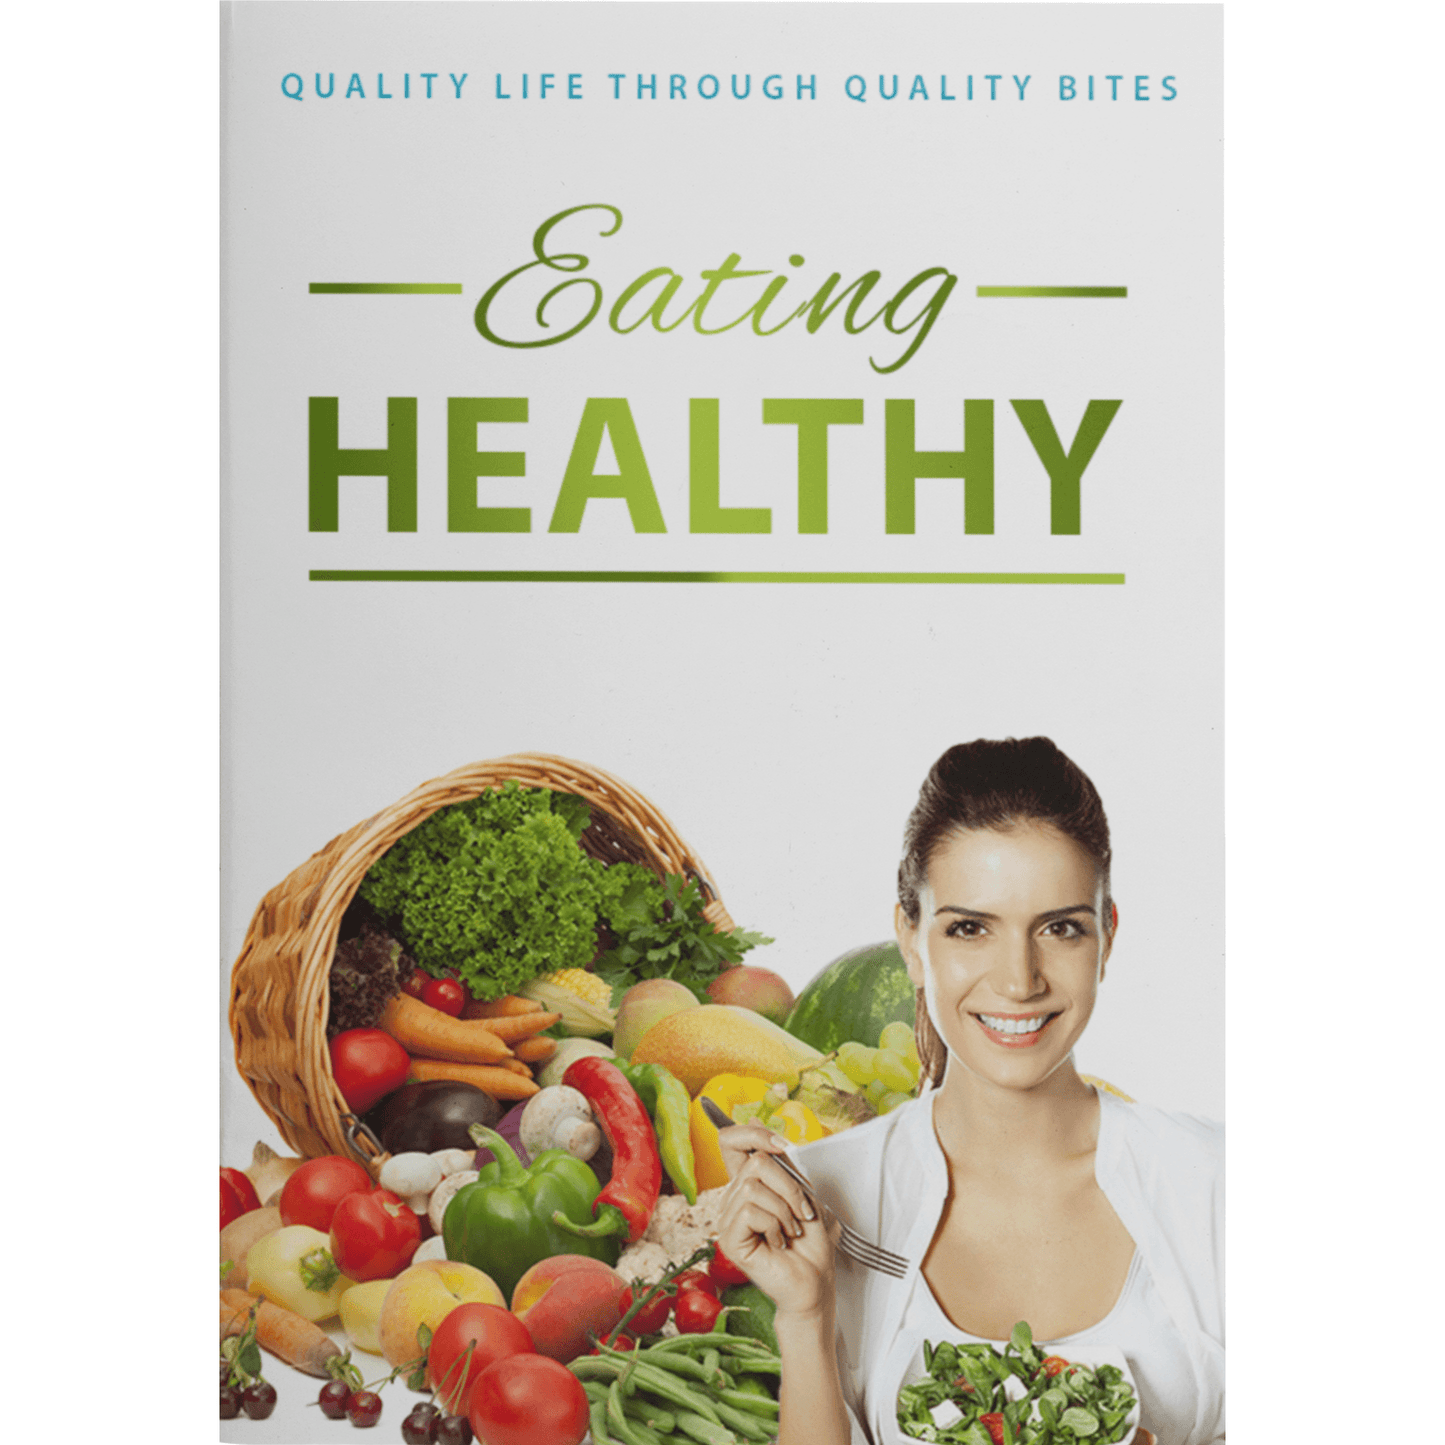 Guide to eating healthy ebook